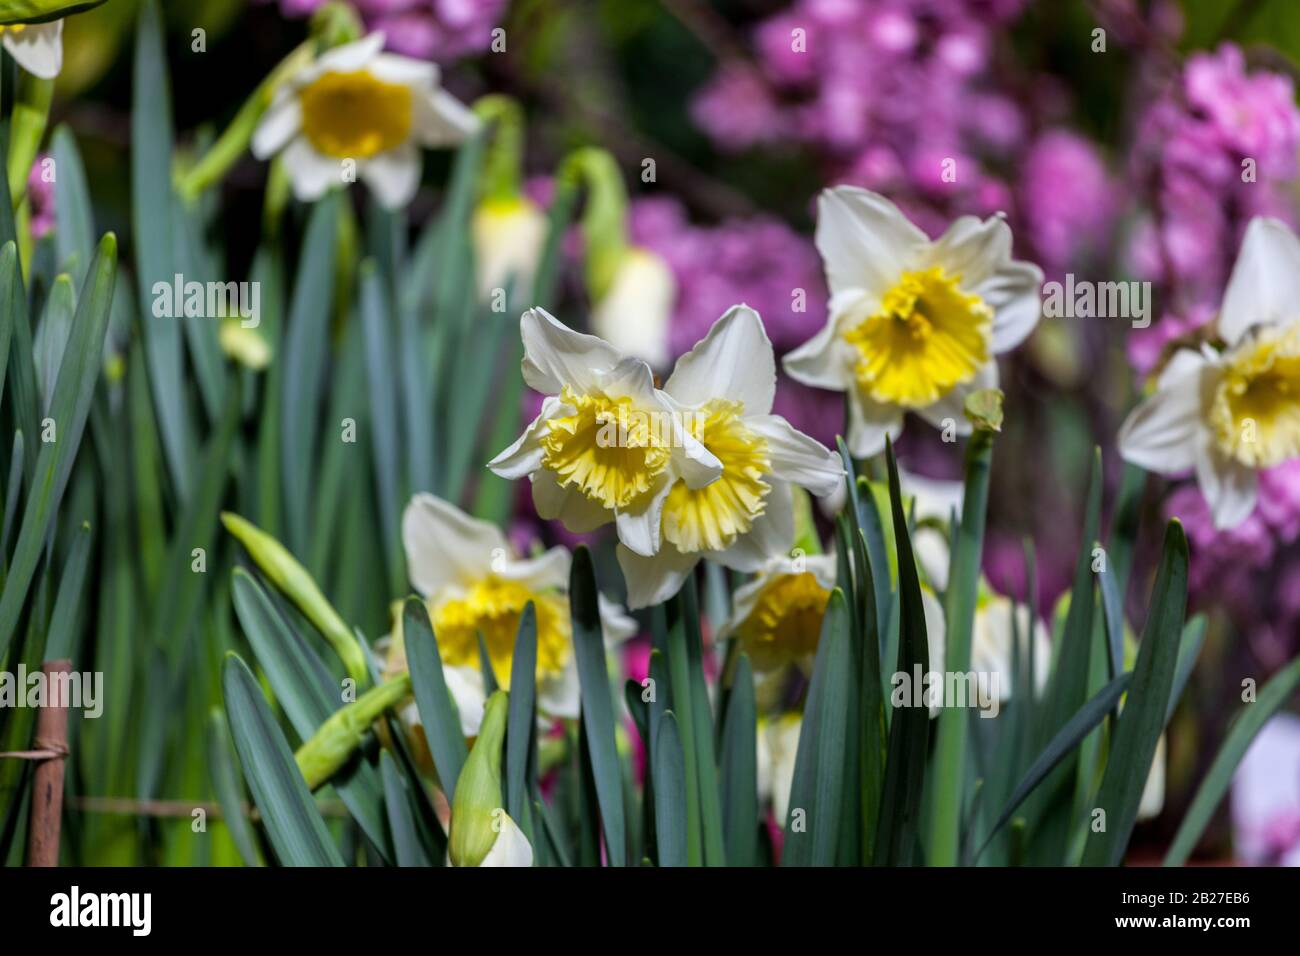 White yellow daffodils spring beauty flowers Stock Photo